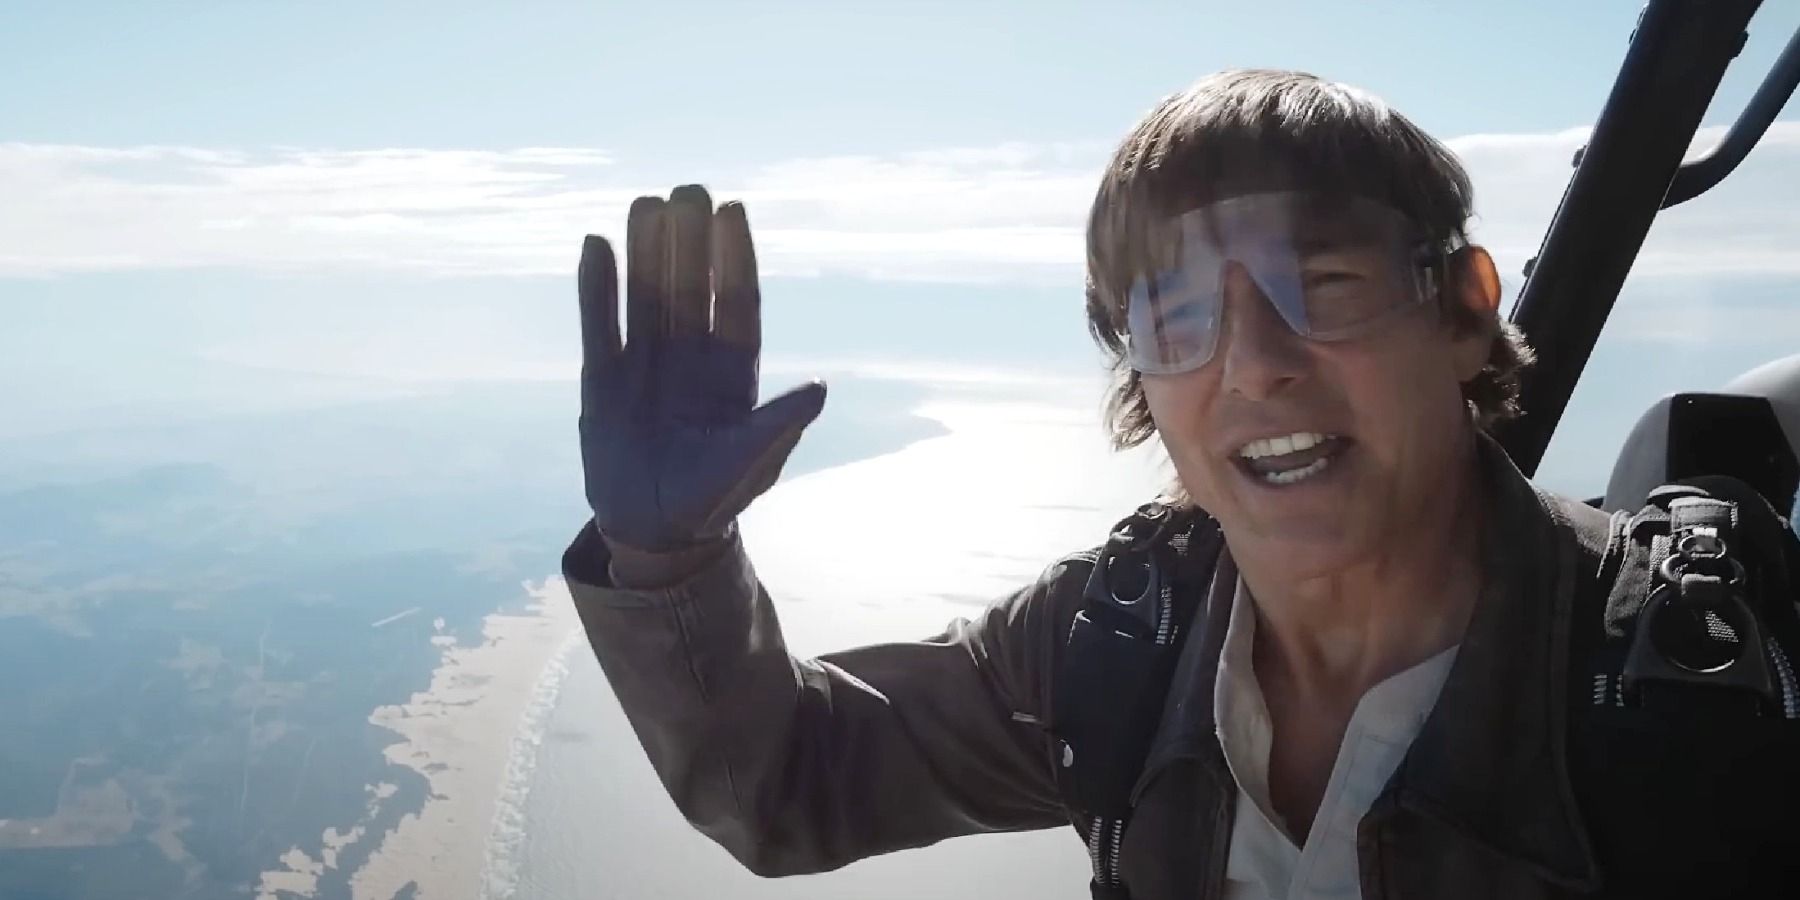 Tom Cruise waves before jumping off a plane in Mission Impossible Dead Reckoning set